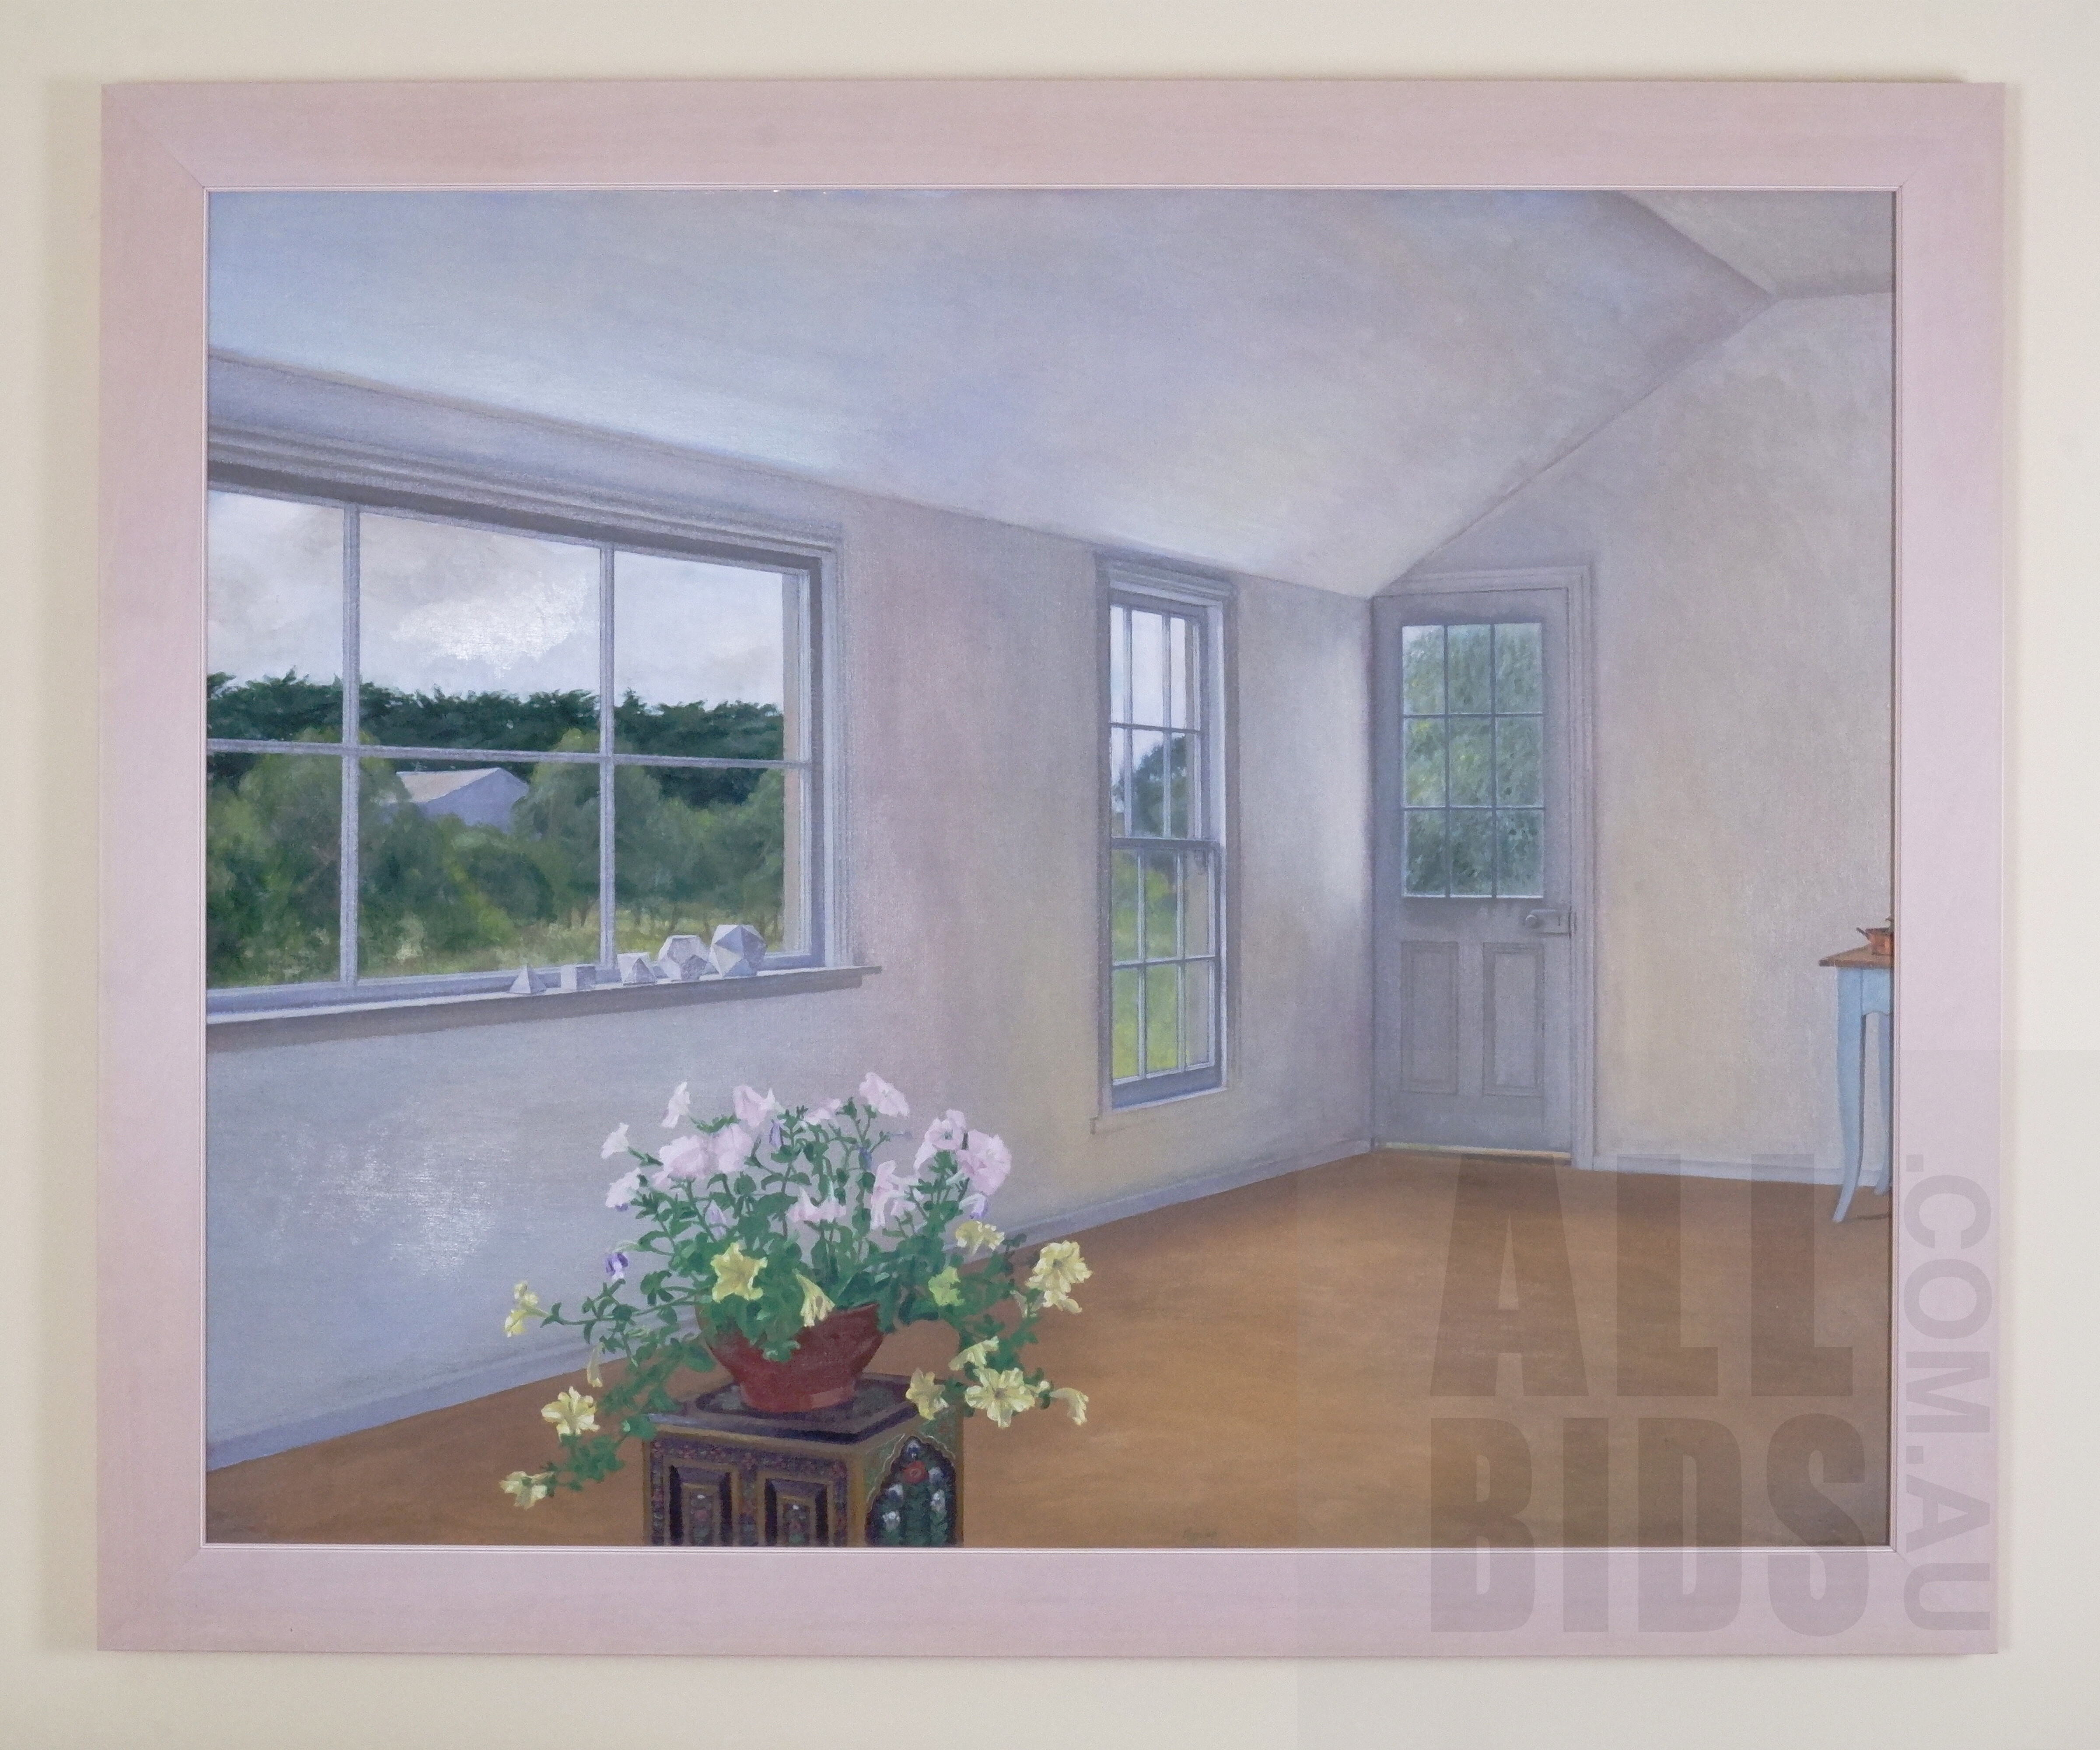 'Brian Dunlop (1938-2009), Interior with Platonic Solids, Oil on Canvas, 87 x 109 cm'